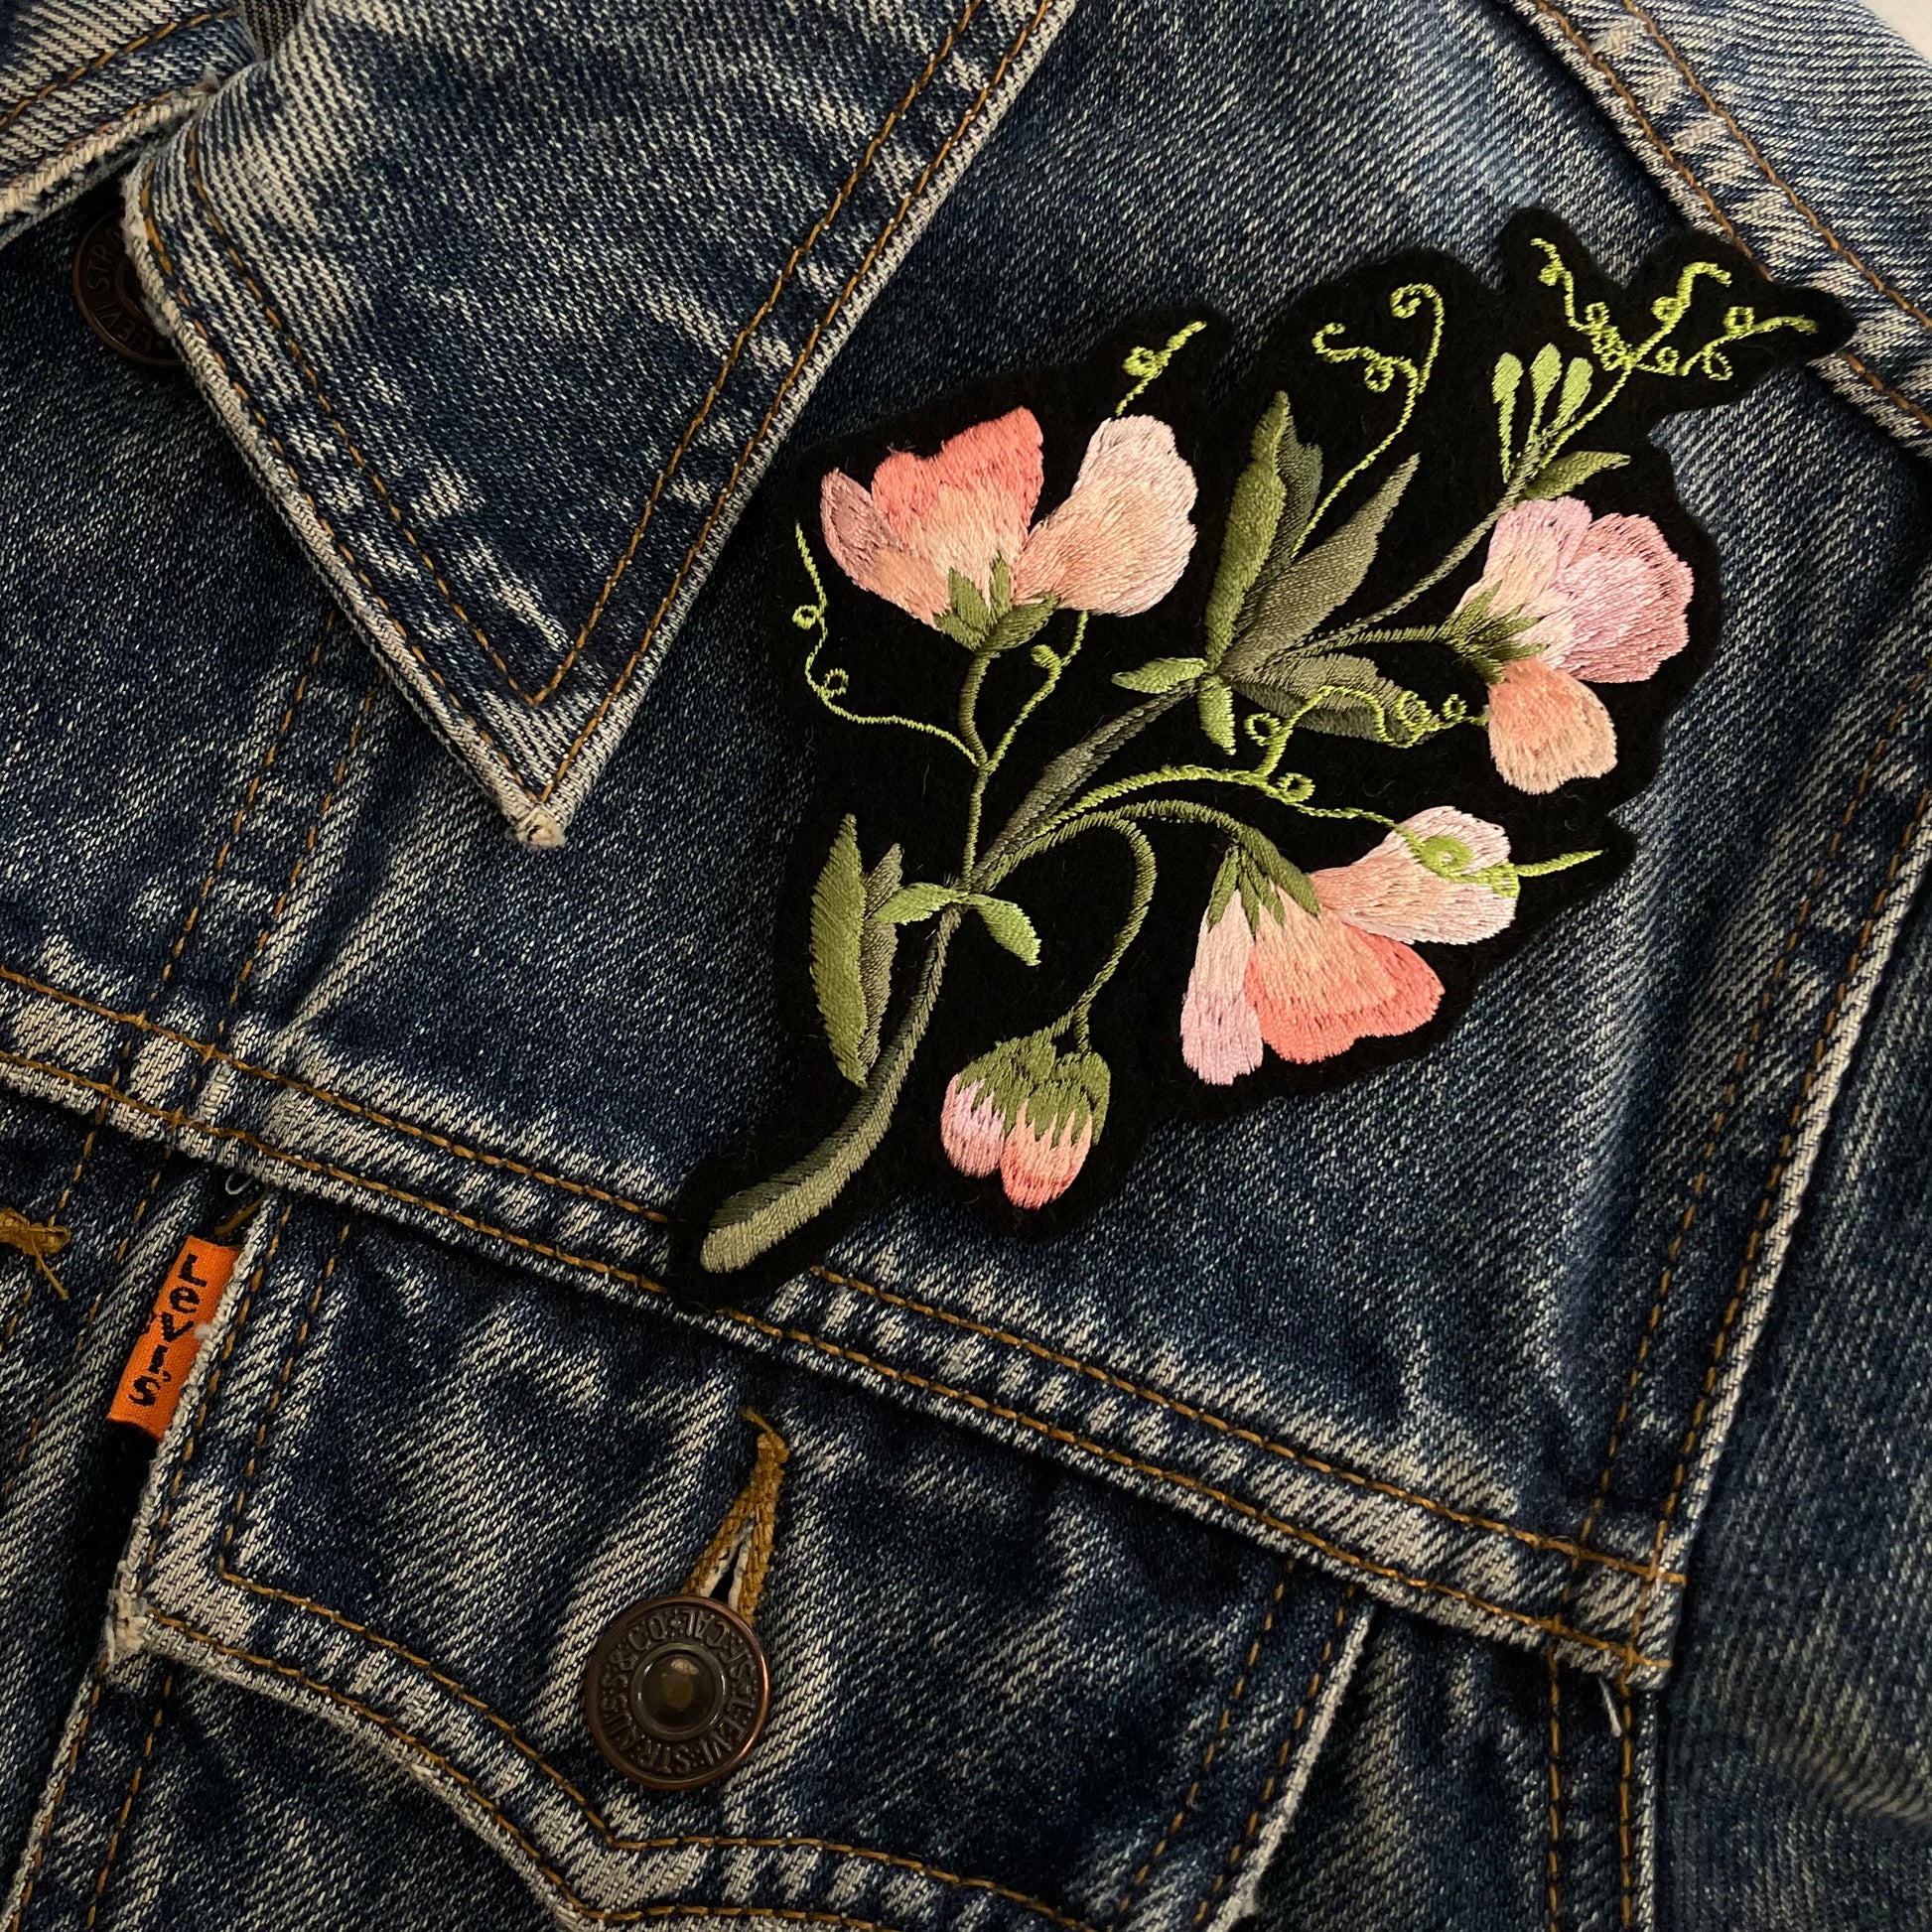 Embroidered sweet pea patch seen on the front shoulder of a blue denim jacket